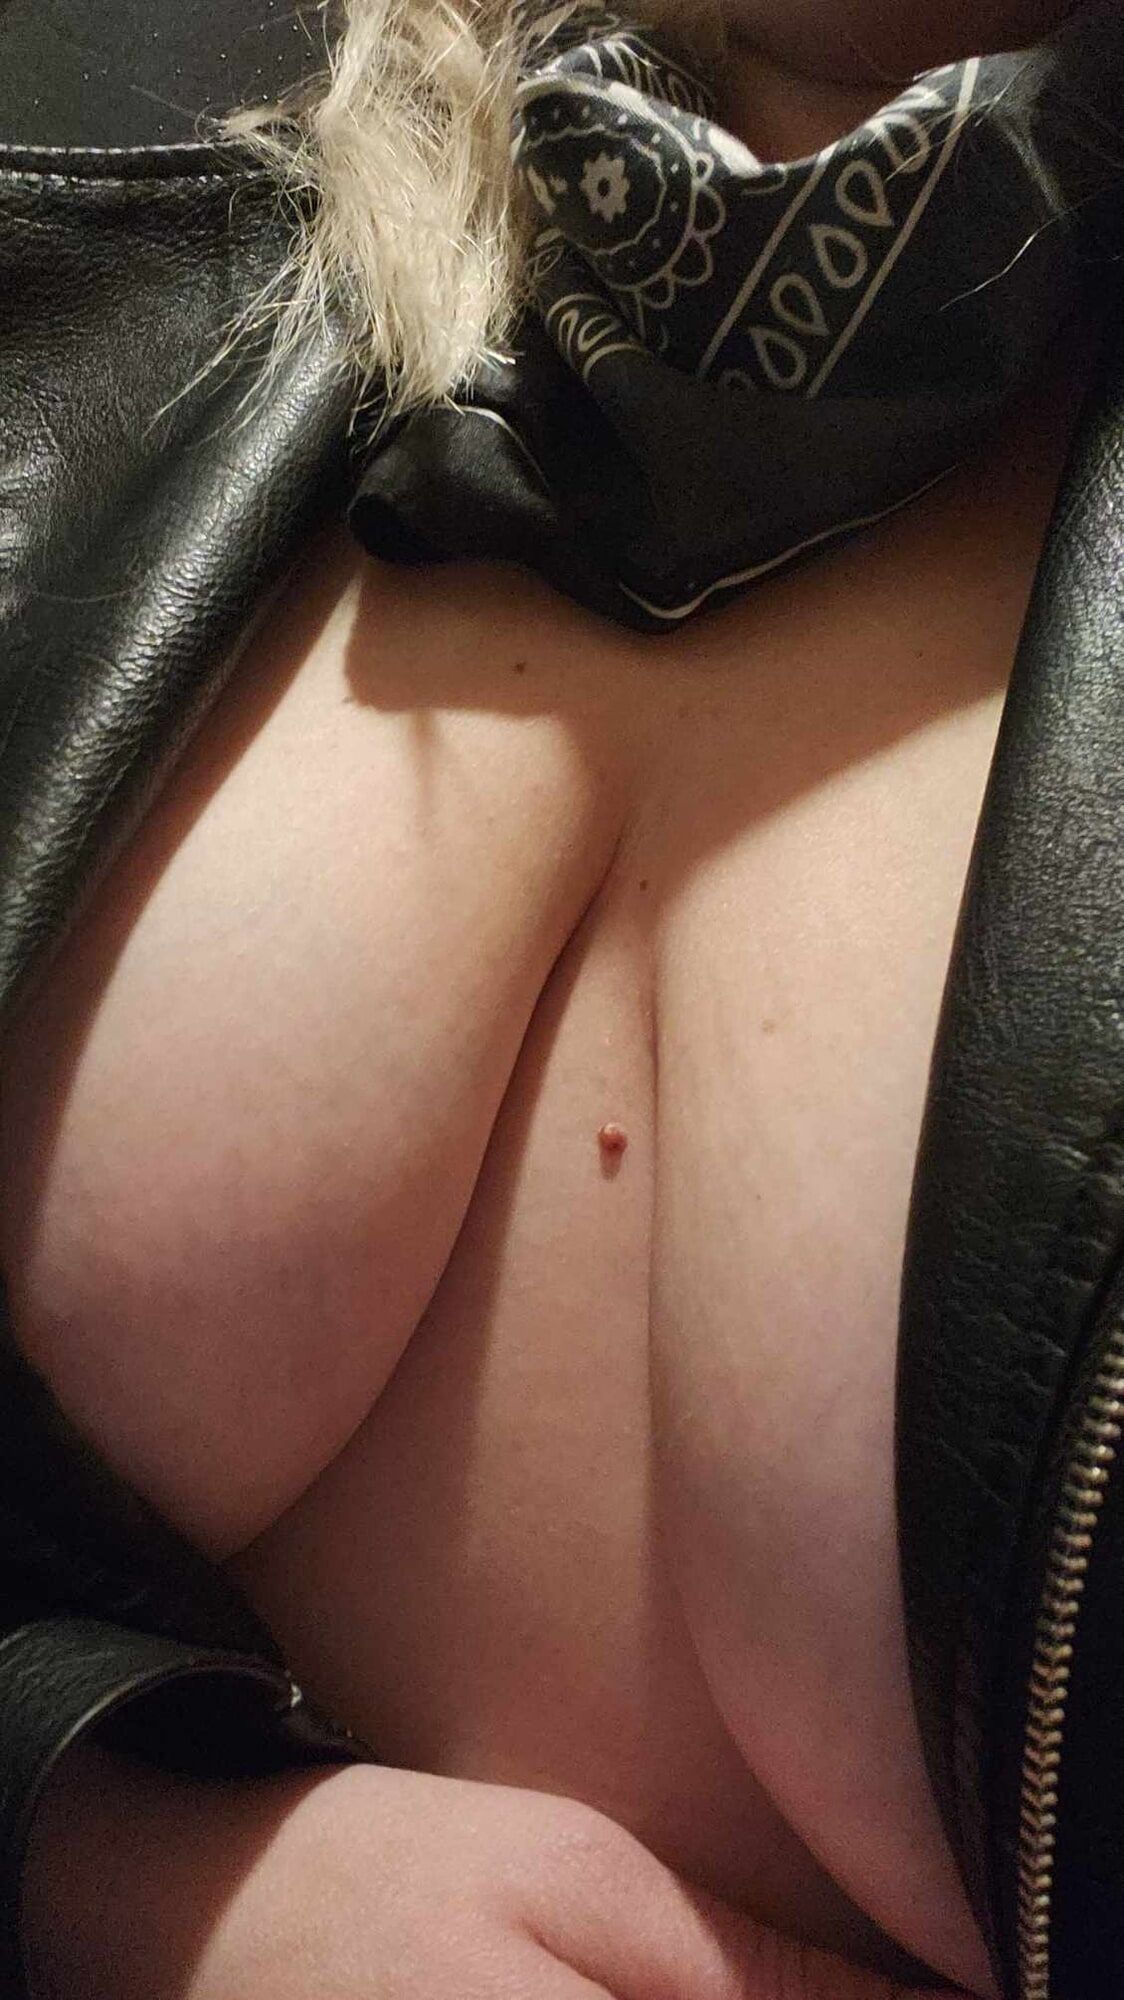 my tits and something else